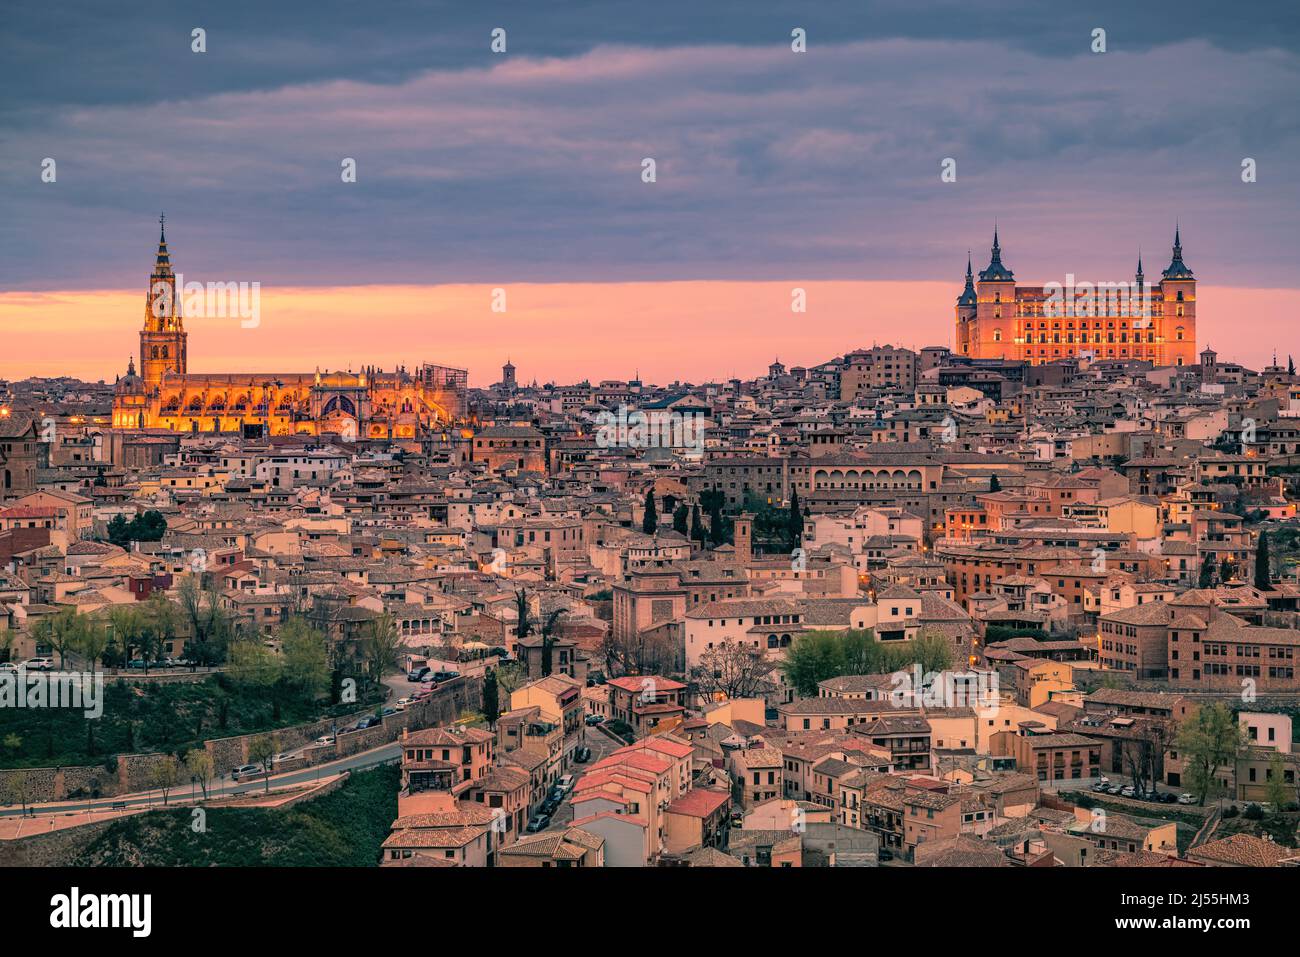 An evening in Toledeo with the view towards the Cathedral (Catedral de Santa María de Toledo) and the Alcazar of Toledo. The Alcázar of Toledo is a st Stock Photo